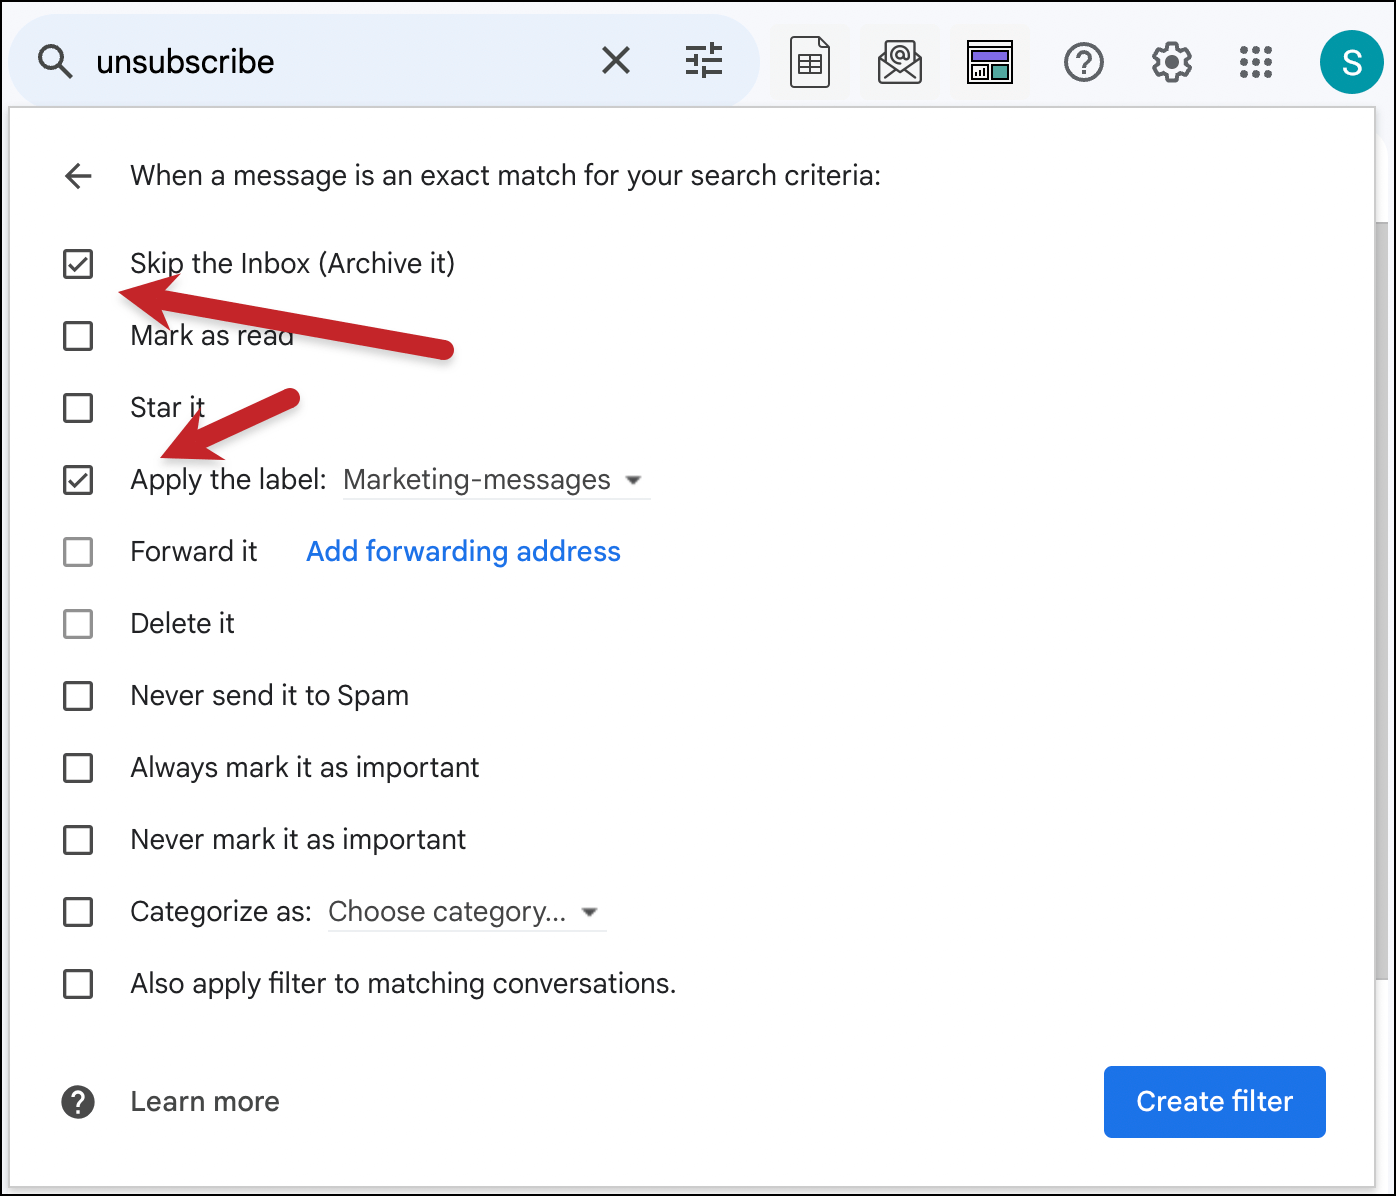 Settings for your filter and label